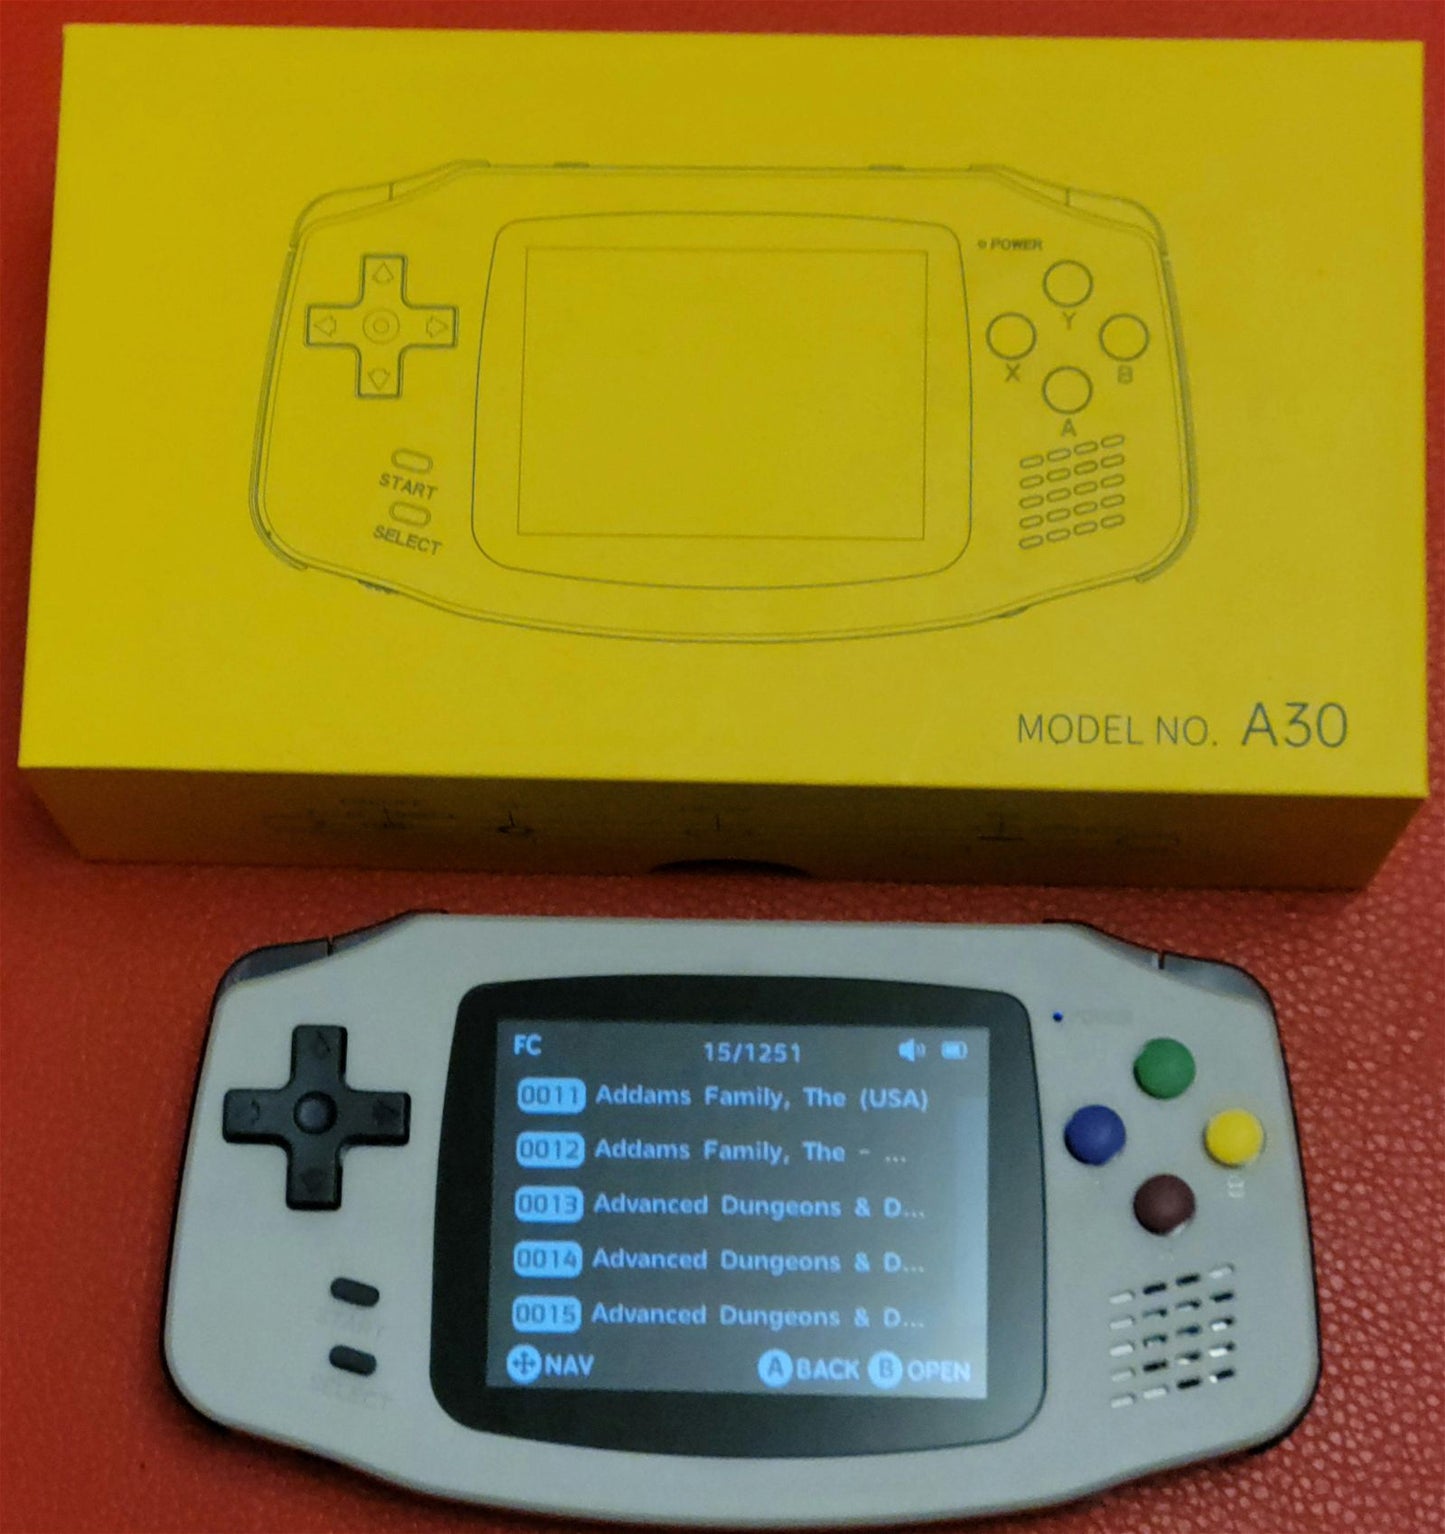 New powkiddy A30 ultra portable retro handheld gaming console, GBA design, 32GB plug and play - Arcadeclassics